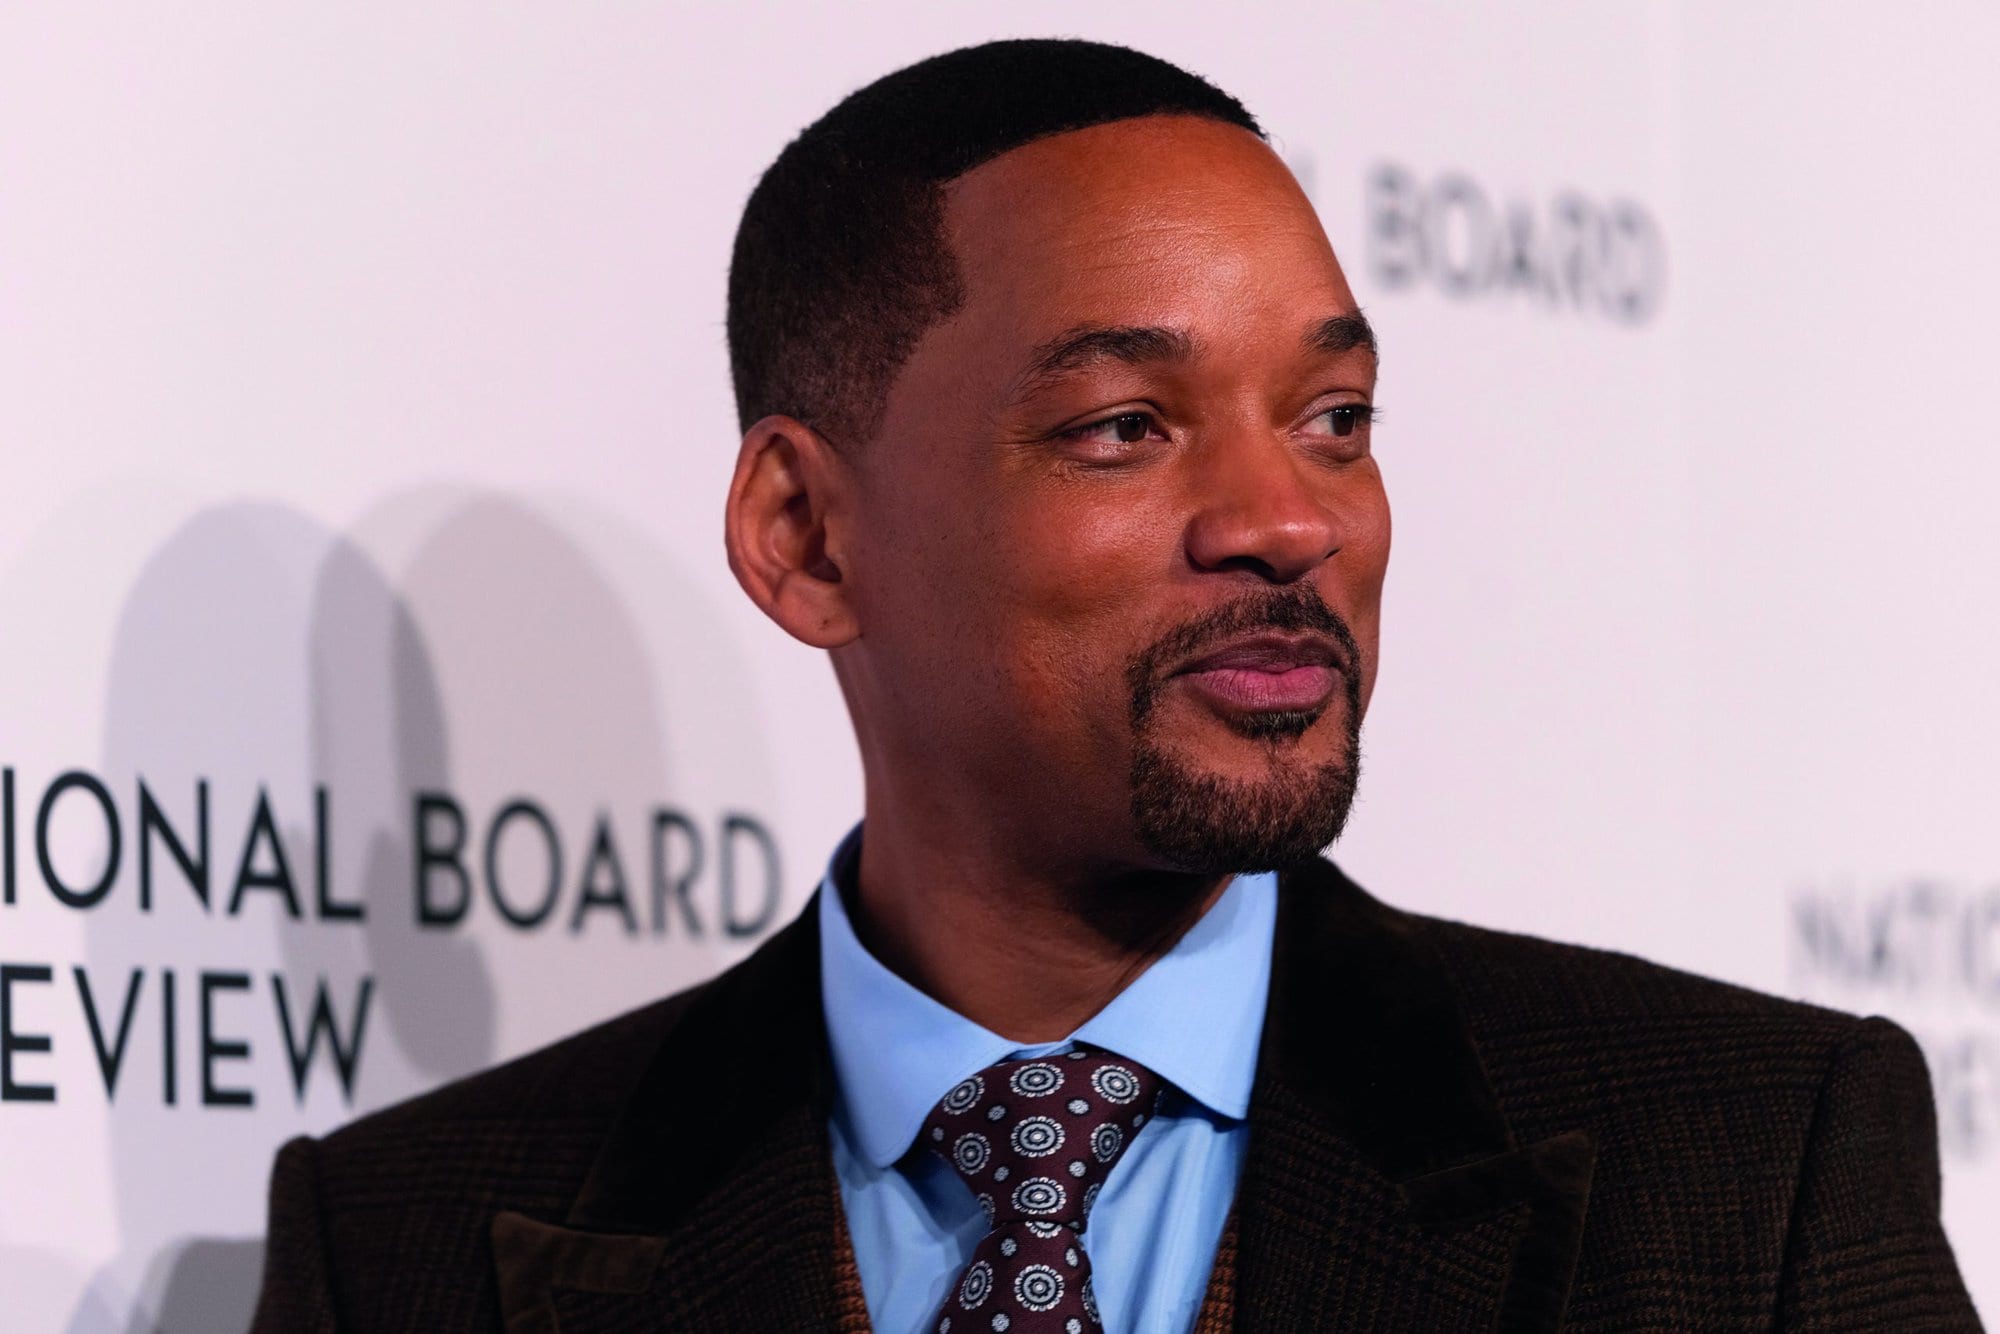 New York, NY - March 15, 2022: Will Smith attends National Board of Review Gala 2022 at Cipriani 42nd street